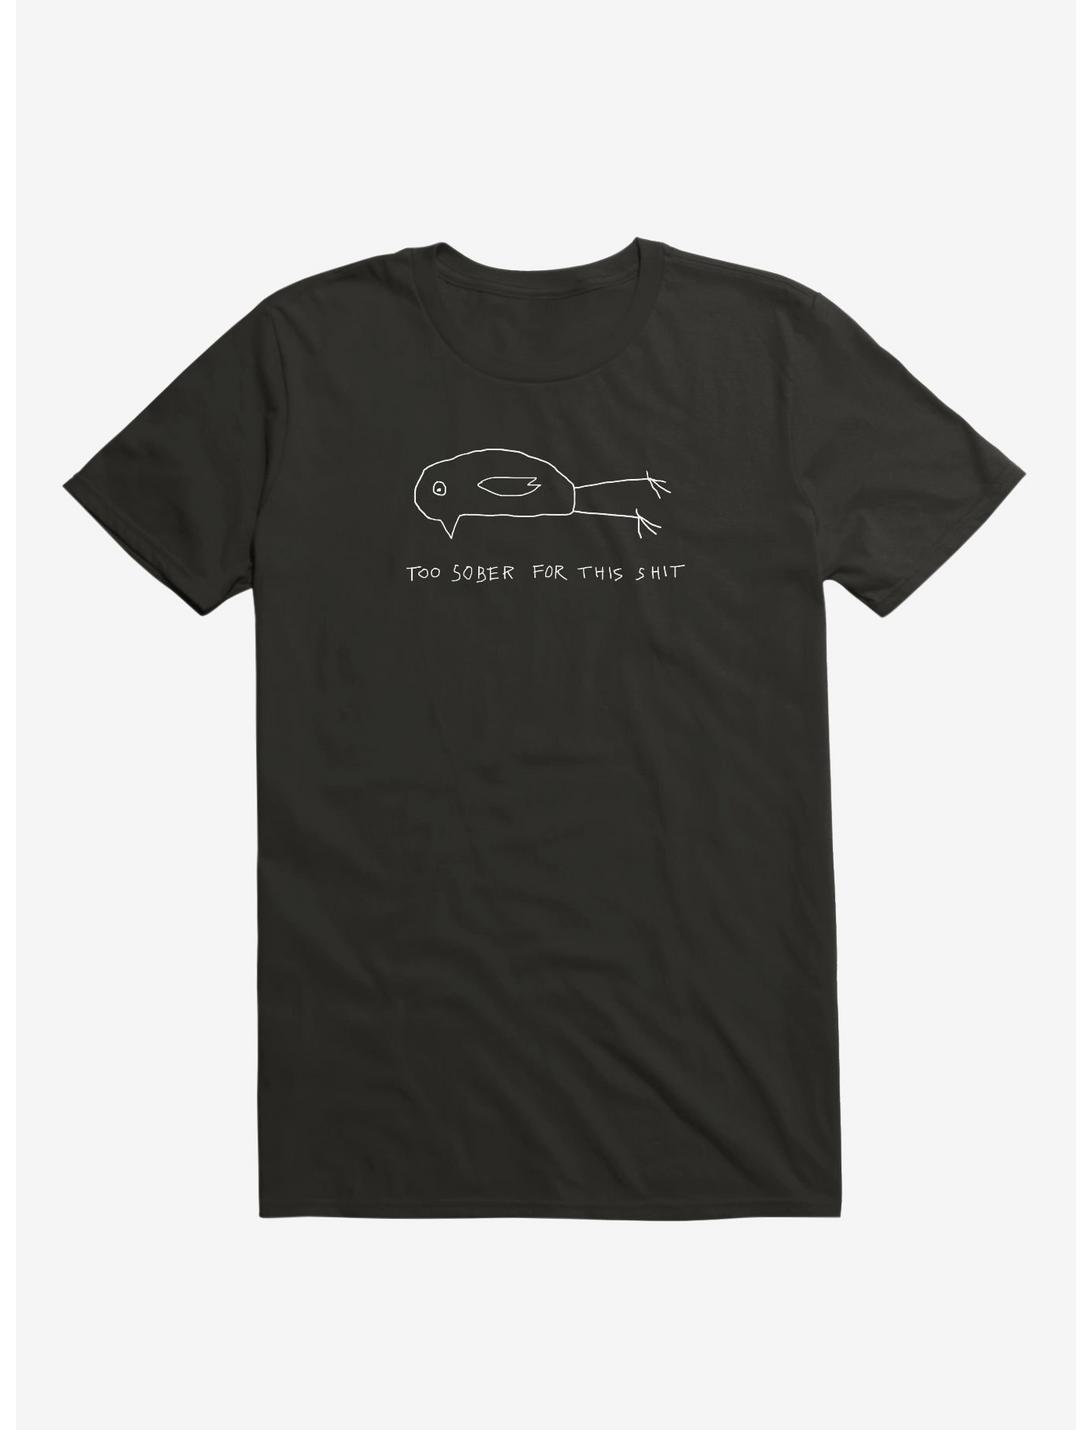 Too Sober For This Shit T-Shirt, BLACK, hi-res